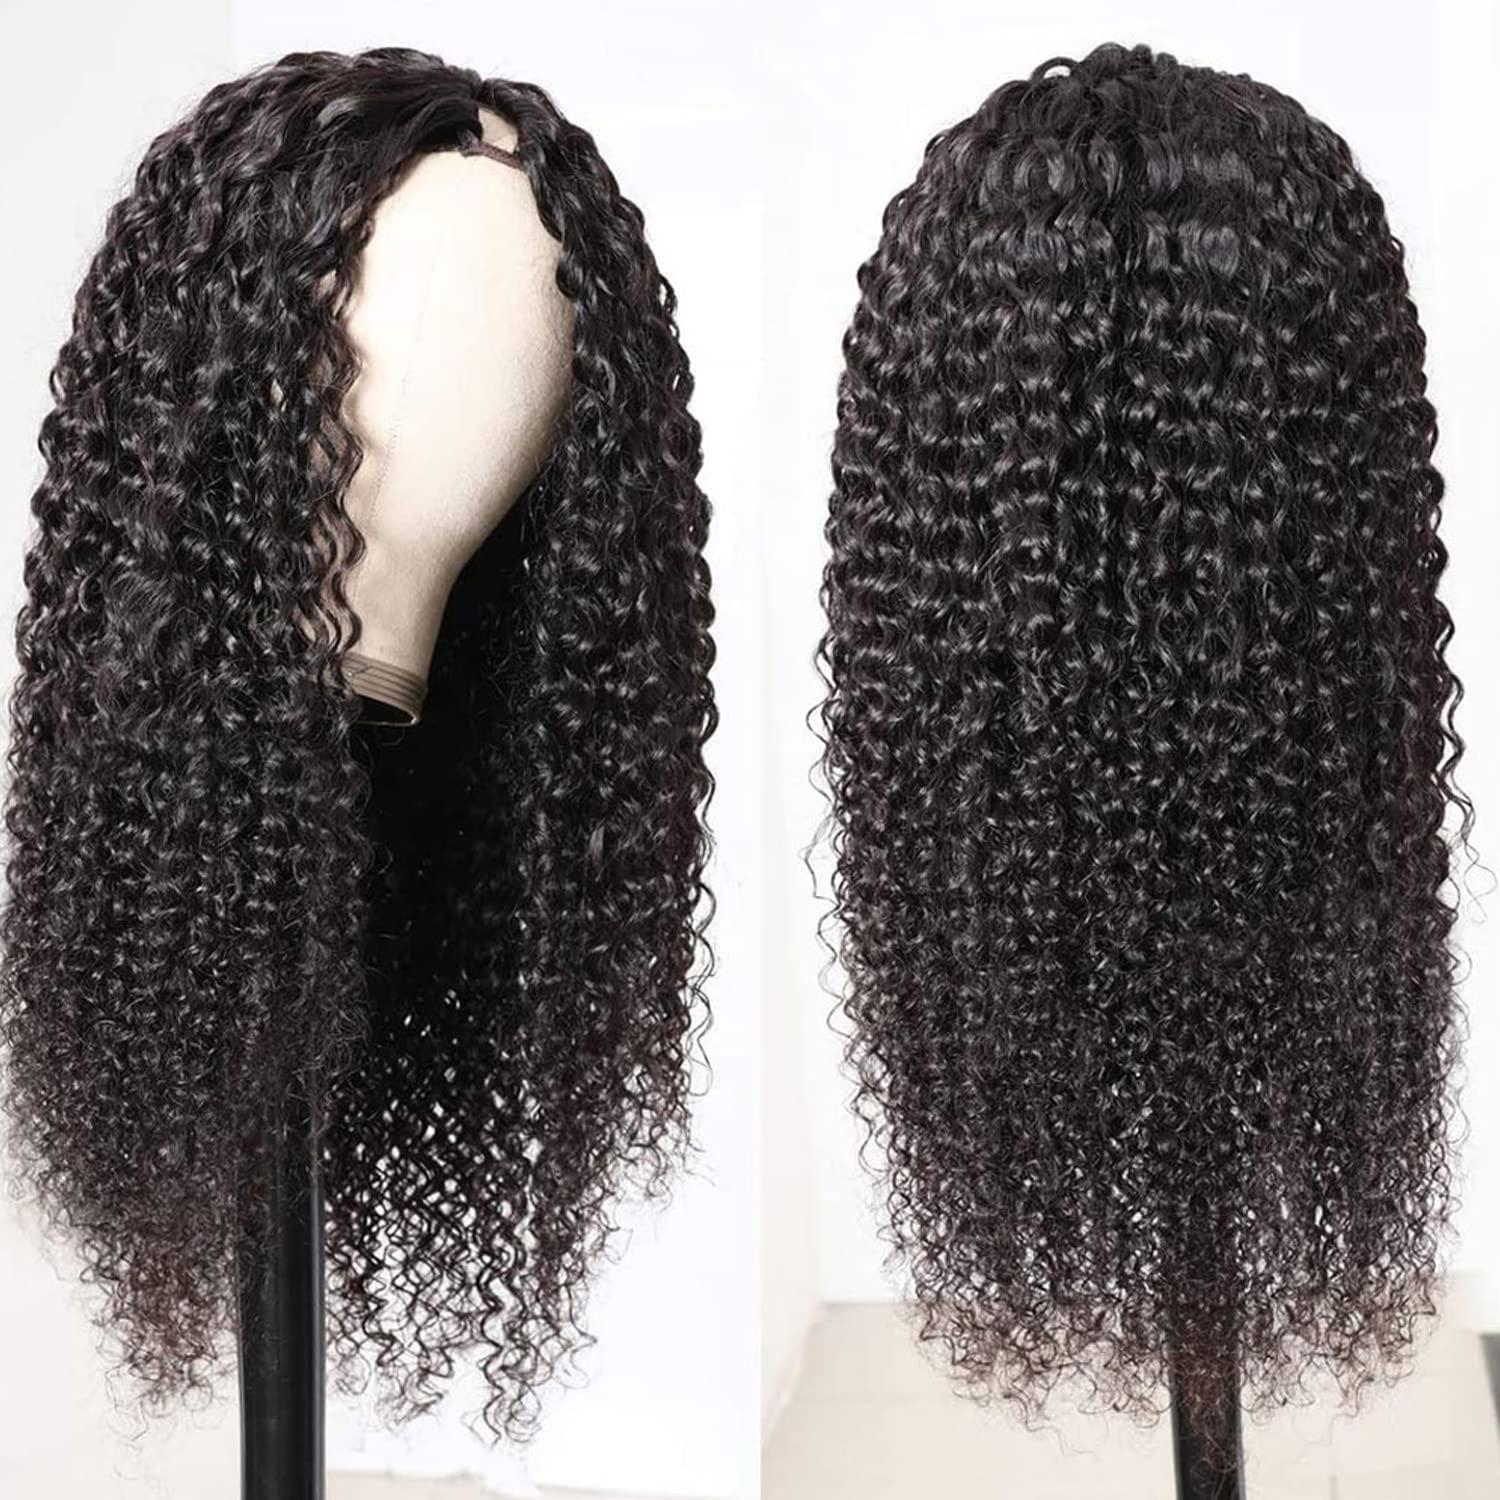 Megalook V Part Wigs Human Hair Curly Human Hair Wigs For Black Women Curly Hair Wigs Upgrade U 